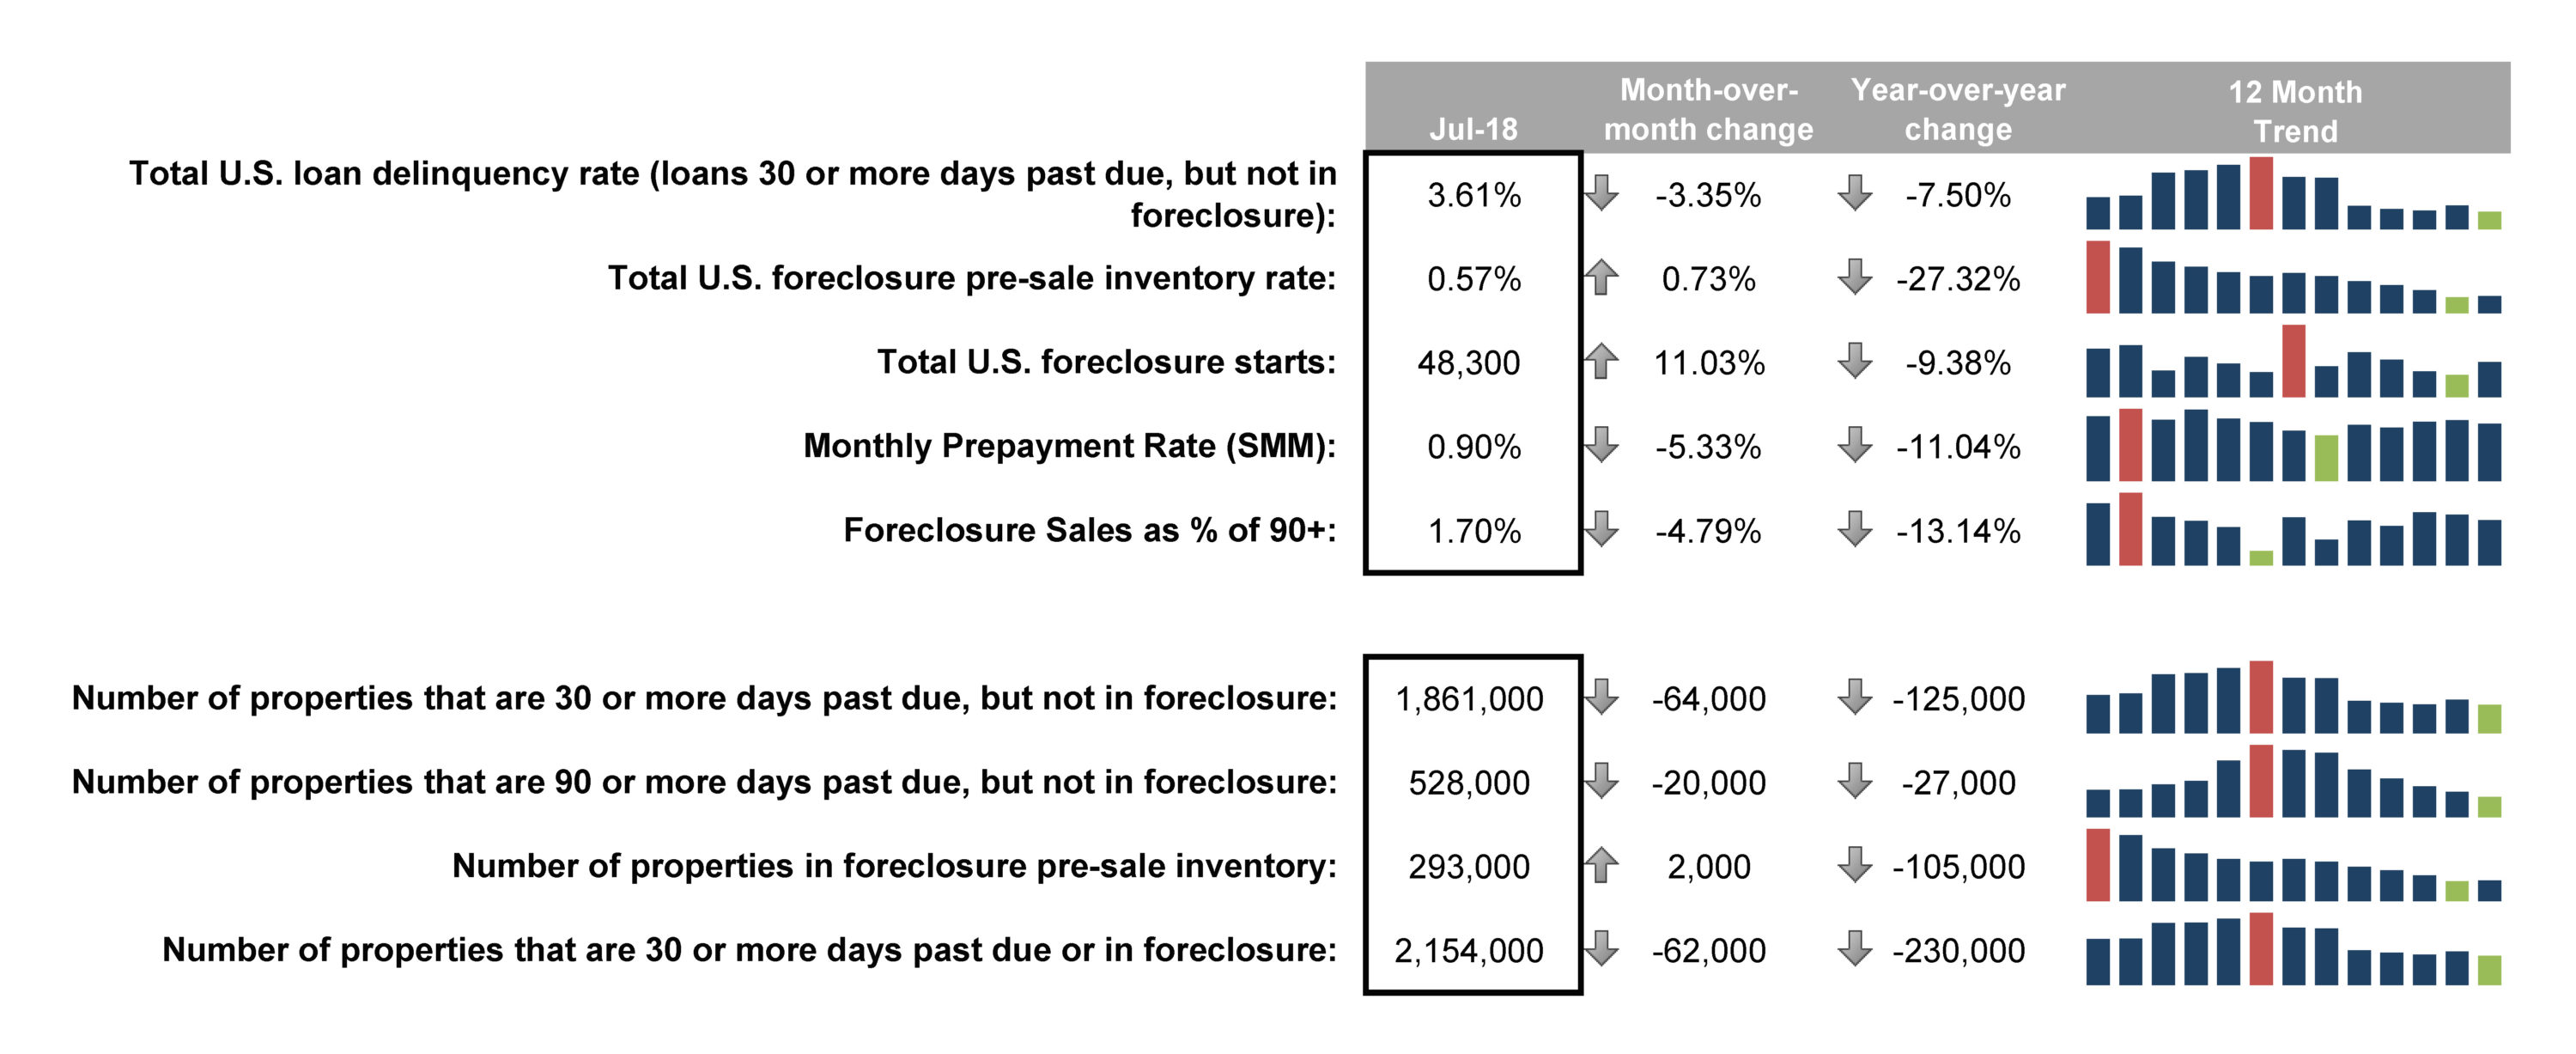 Mortgage delinquencies in July plummeted to their lowest levels since March 2006, according to new data from Black Knight Inc.